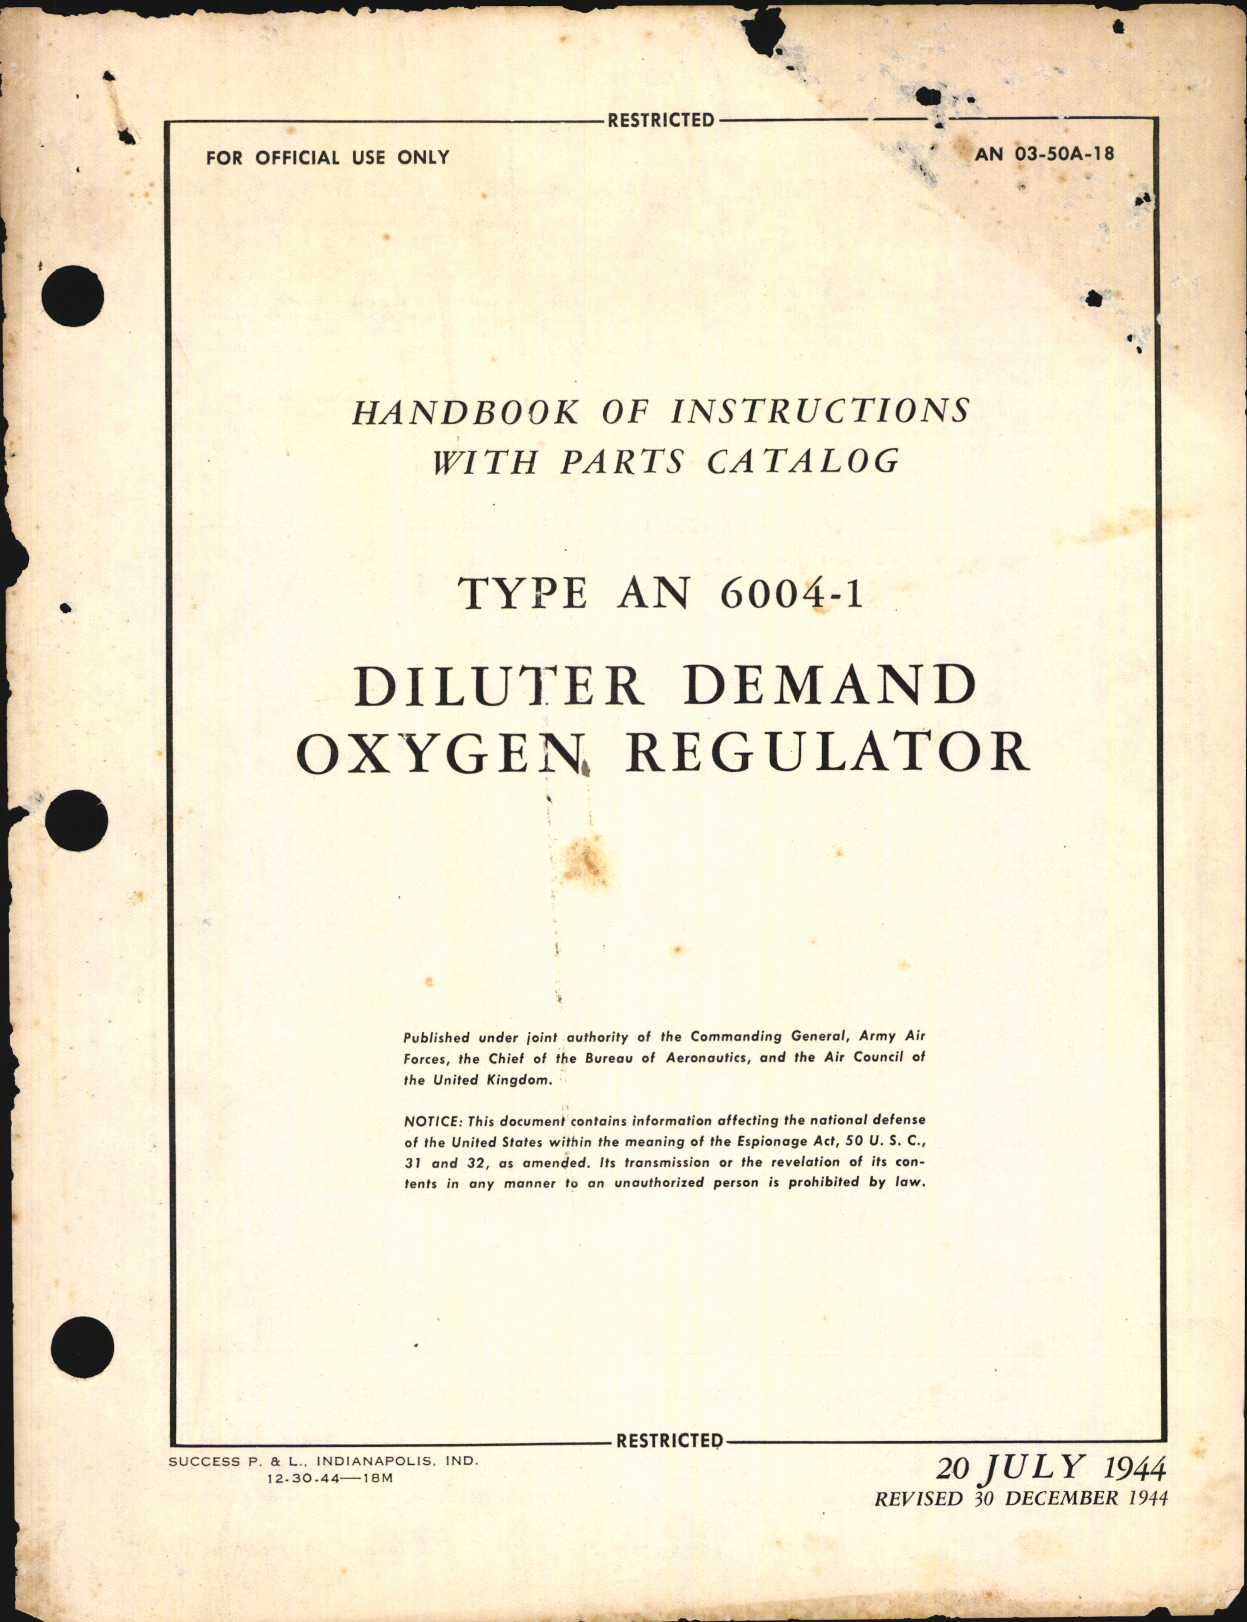 Sample page 1 from AirCorps Library document: Handbook of Instructions with Parts Catalog for Type AN 6004-1 Diluter Demand Oxygen Regulator